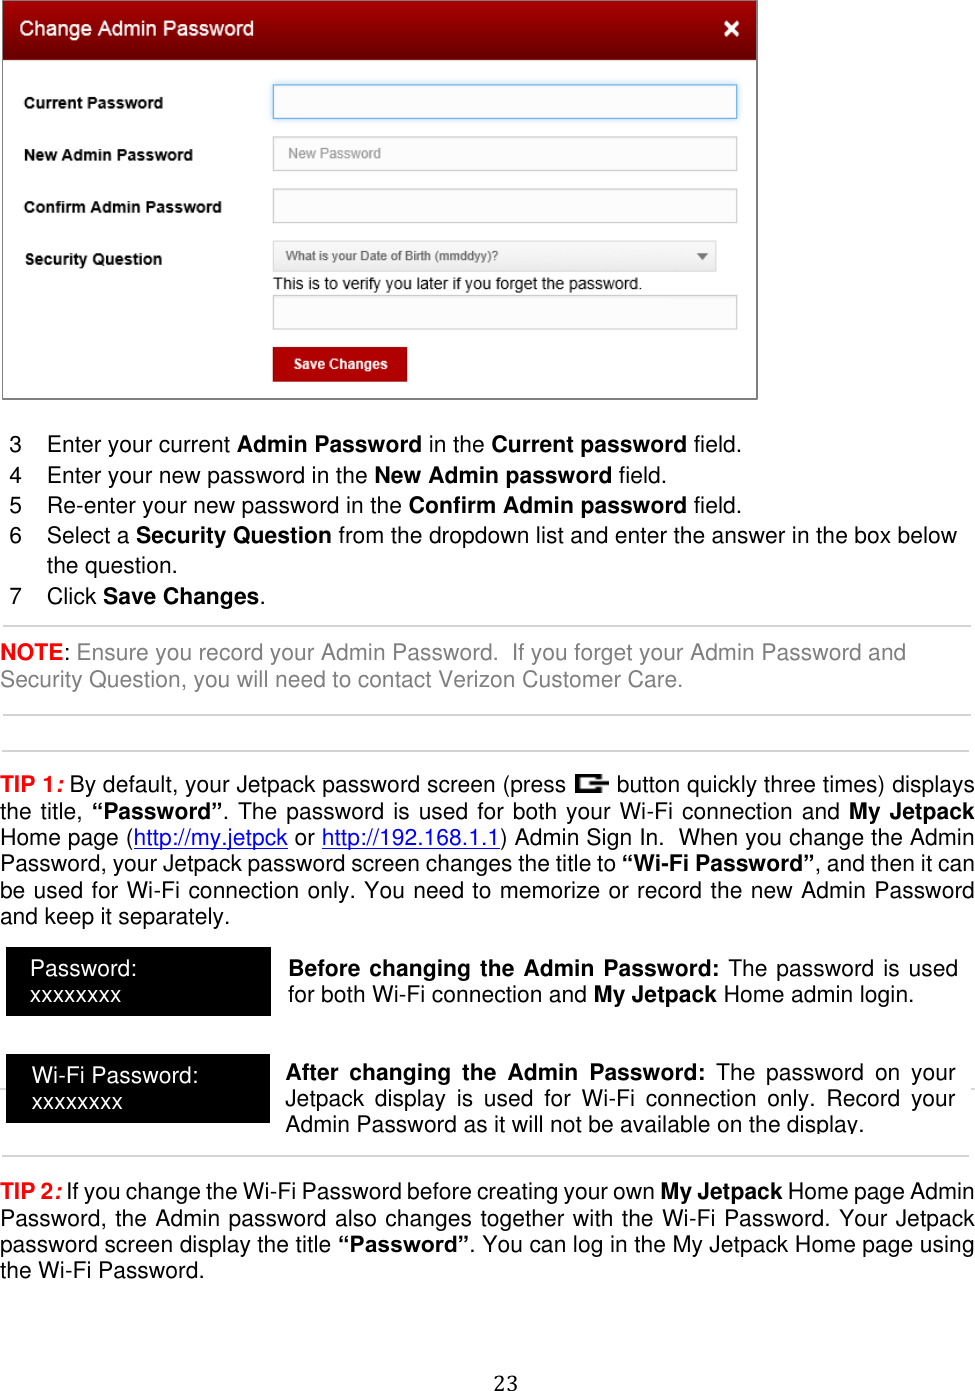   23    3  Enter your current Admin Password in the Current password field. 4  Enter your new password in the New Admin password field. 5  Re-enter your new password in the Confirm Admin password field. 6  Select a Security Question from the dropdown list and enter the answer in the box below the question. 7  Click Save Changes.  NOTE: Ensure you record your Admin Password.  If you forget your Admin Password and Security Question, you will need to contact Verizon Customer Care.    TIP 1: By default, your Jetpack password screen (press   button quickly three times) displays the title, “Password”. The password is used for both your Wi-Fi connection and My Jetpack Home page (http://my.jetpck or http://192.168.1.1) Admin Sign In.  When you change the Admin Password, your Jetpack password screen changes the title to “Wi-Fi Password”, and then it can be used for Wi-Fi connection only. You need to memorize or record the new Admin Password and keep it separately.          TIP 2: If you change the Wi-Fi Password before creating your own My Jetpack Home page Admin Password, the Admin password also changes together with the Wi-Fi Password. Your Jetpack password screen display the title “Password”. You can log in the My Jetpack Home page using the Wi-Fi Password.    Password: xxxxxxxx Wi-Fi Password: xxxxxxxx Before changing the Admin Password: The password is used for both Wi-Fi connection and My Jetpack Home admin login.  After  changing  the  Admin  Password:  The  password  on  your Jetpack  display  is  used  for  Wi-Fi  connection  only.  Record  your Admin Password as it will not be available on the display.  